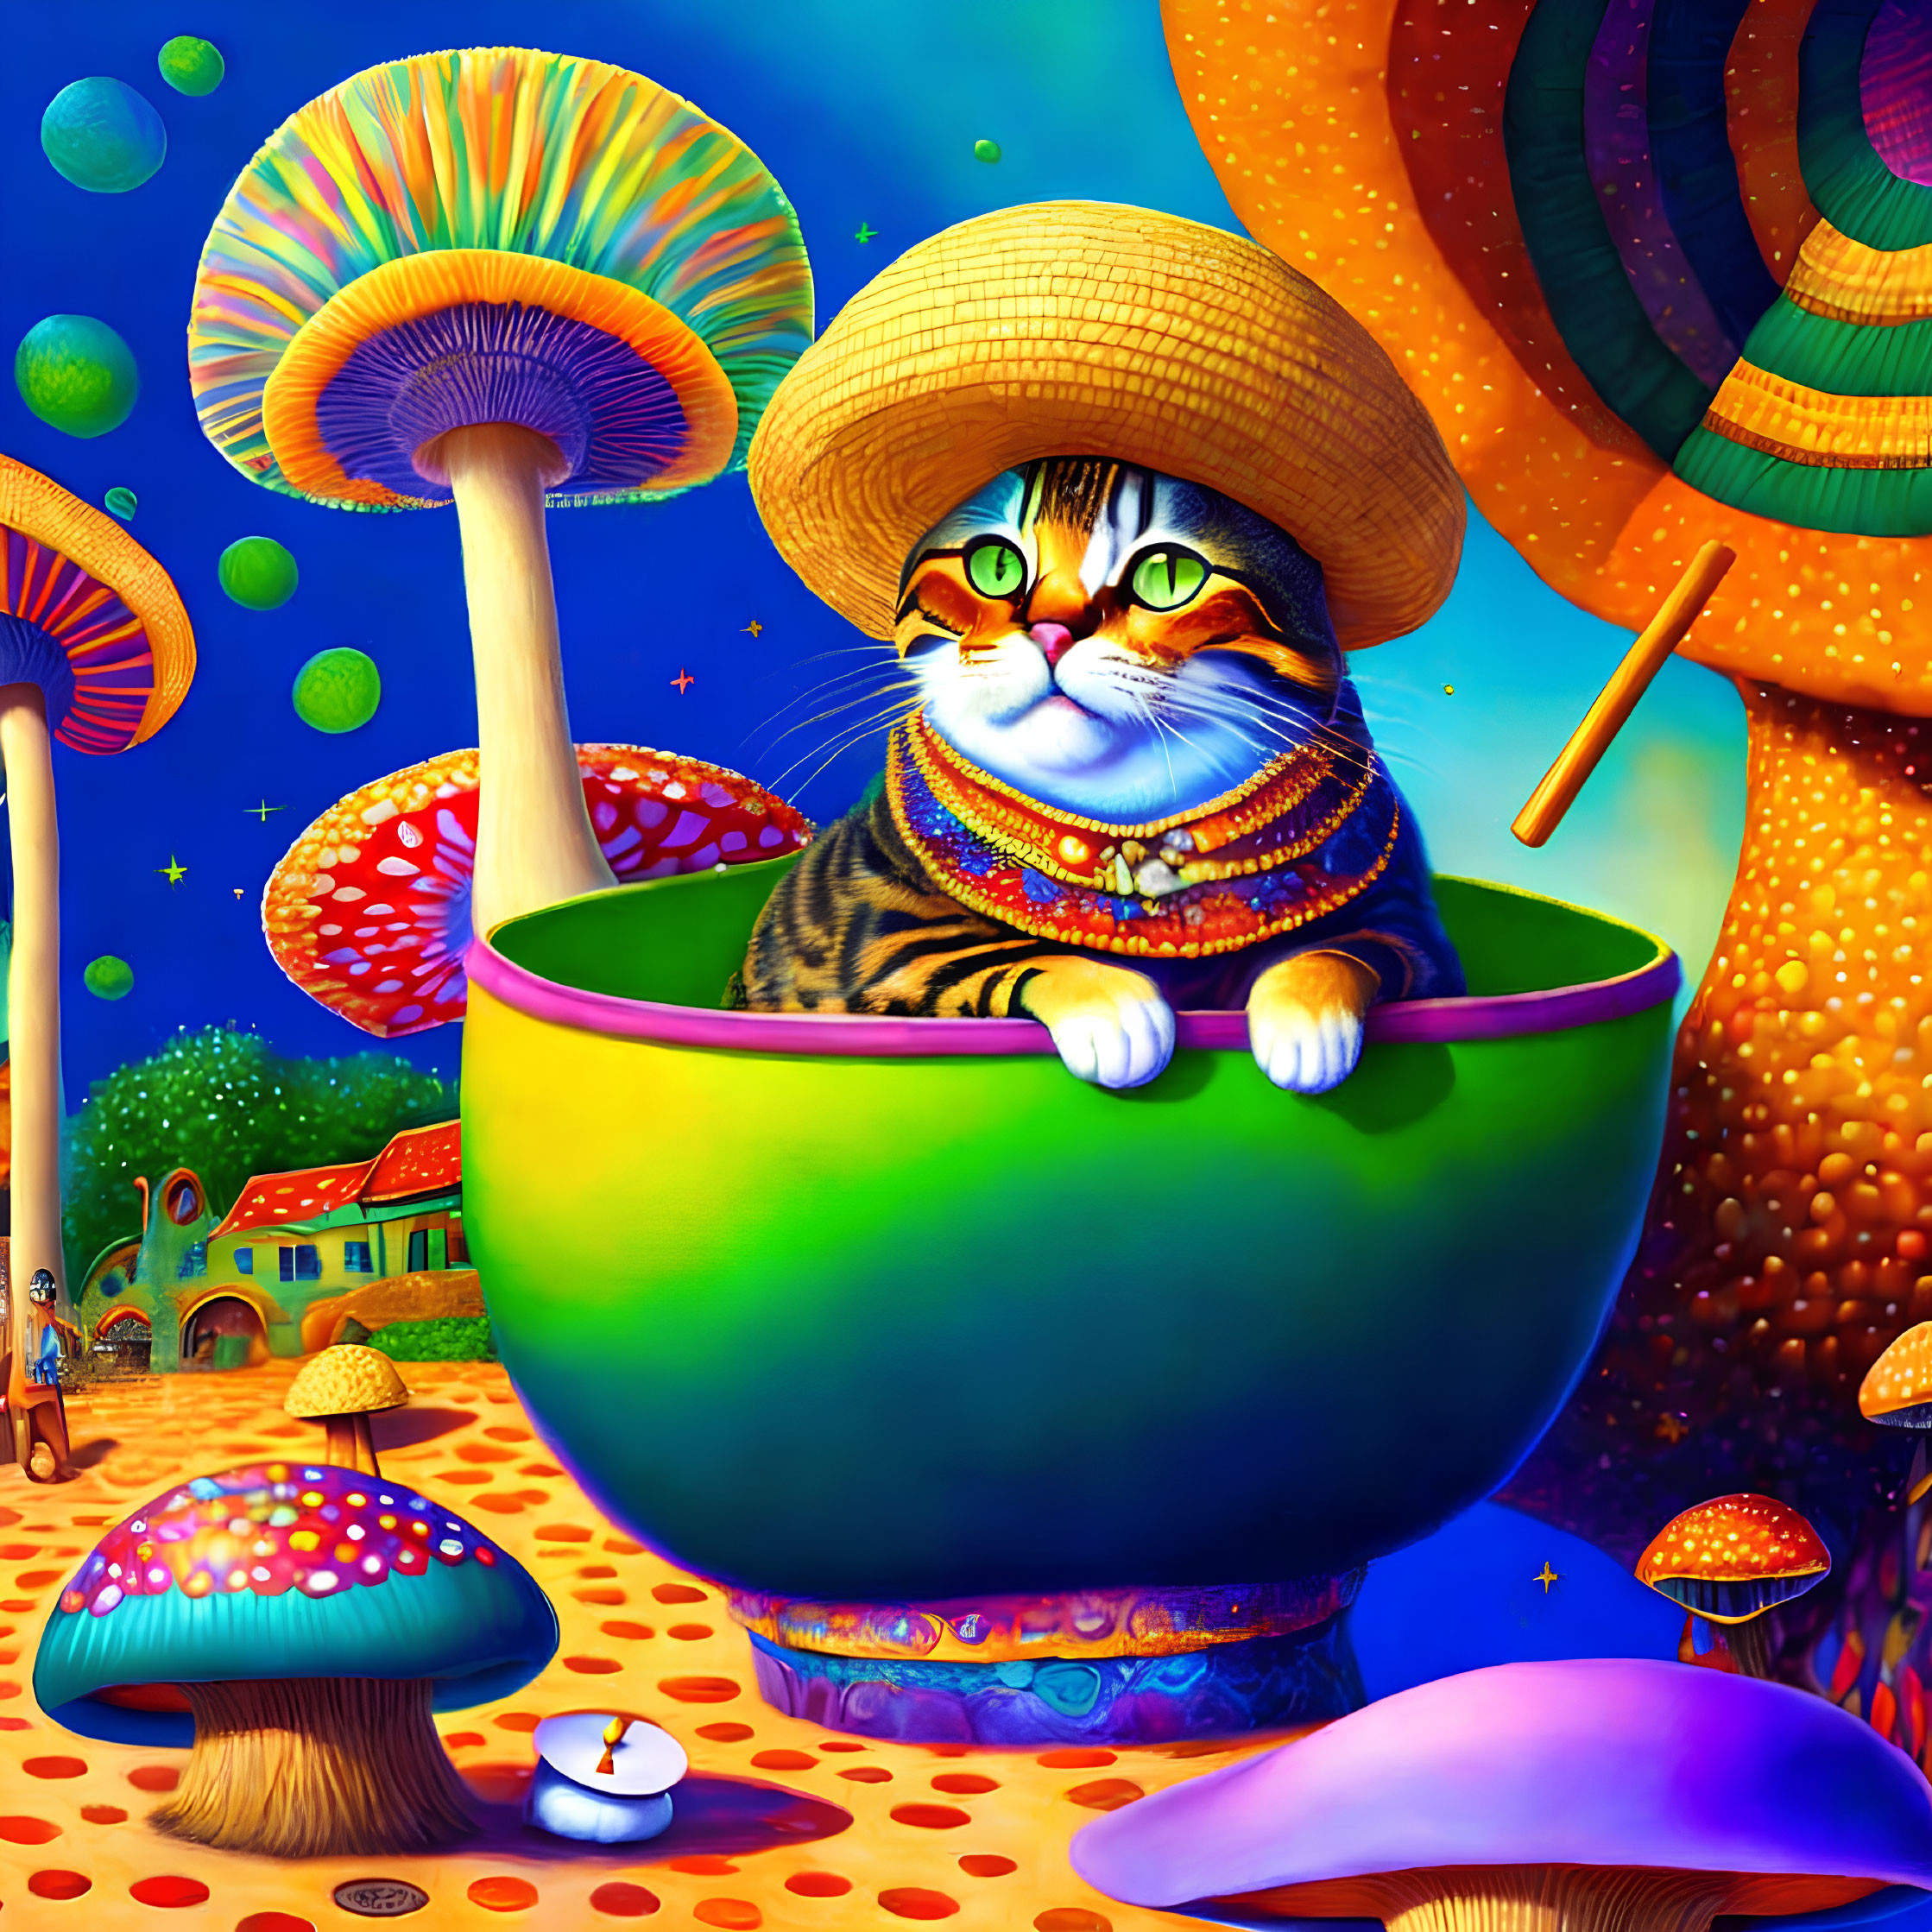 Chubby Cat in Poncho and Hat Sitting in Green Bowl with Oversized Mushrooms